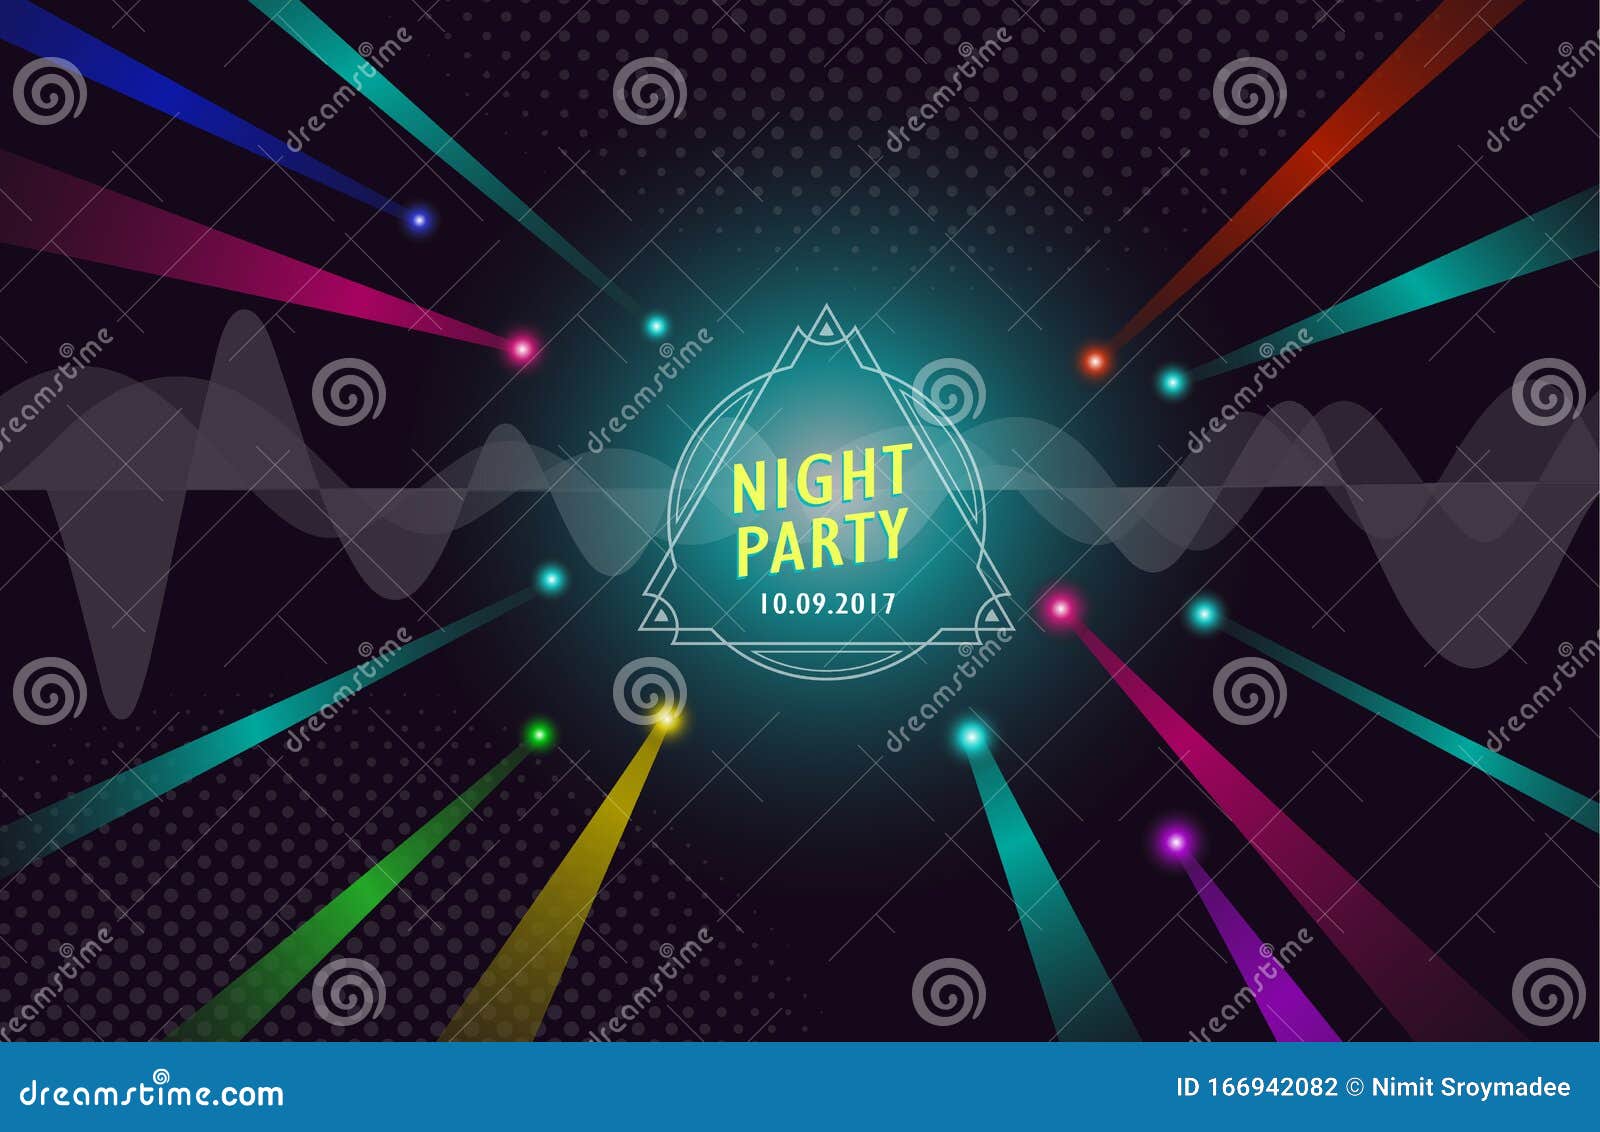 Party Poster Maker: Make a Party Poster Online Instantly